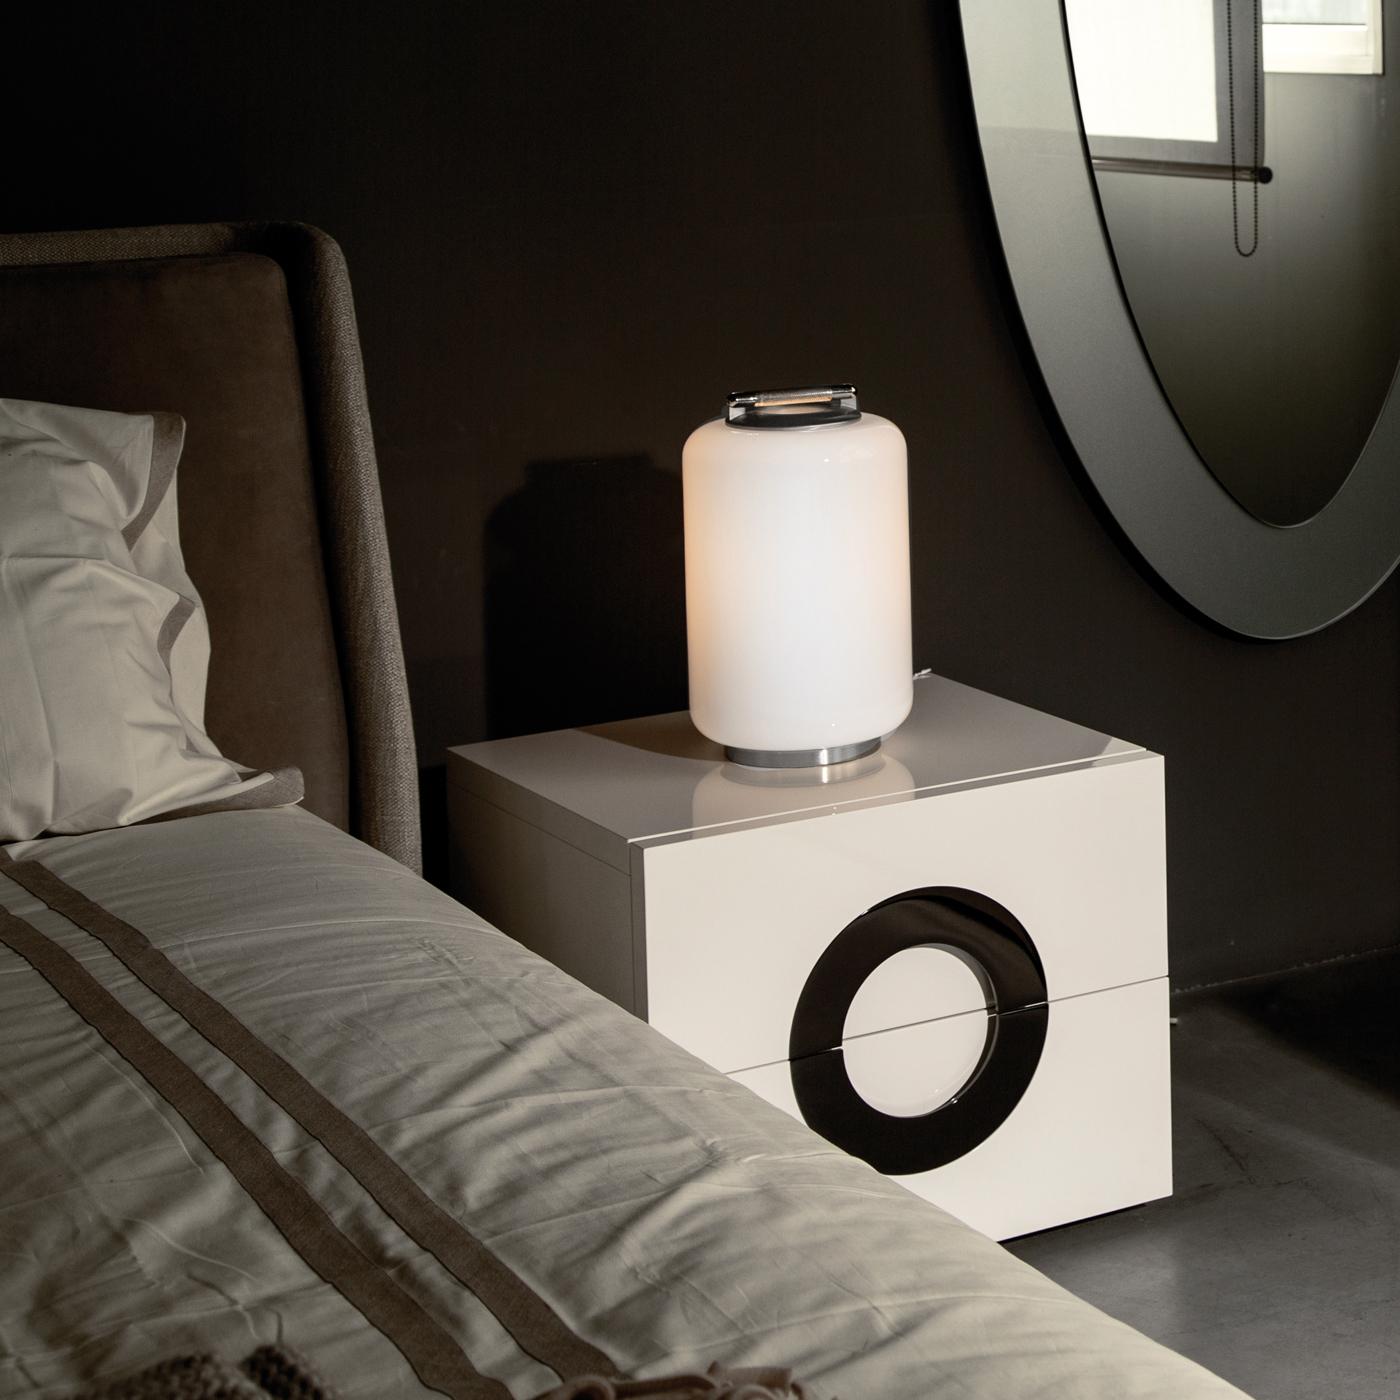 This small and stylish table lamp emits soft, relaxing light through the striking cylindrical diffuser of hand-blown white Murano glass. Resting upon a low, round base made of satin nickel metal, the small size and understated silhouette of this